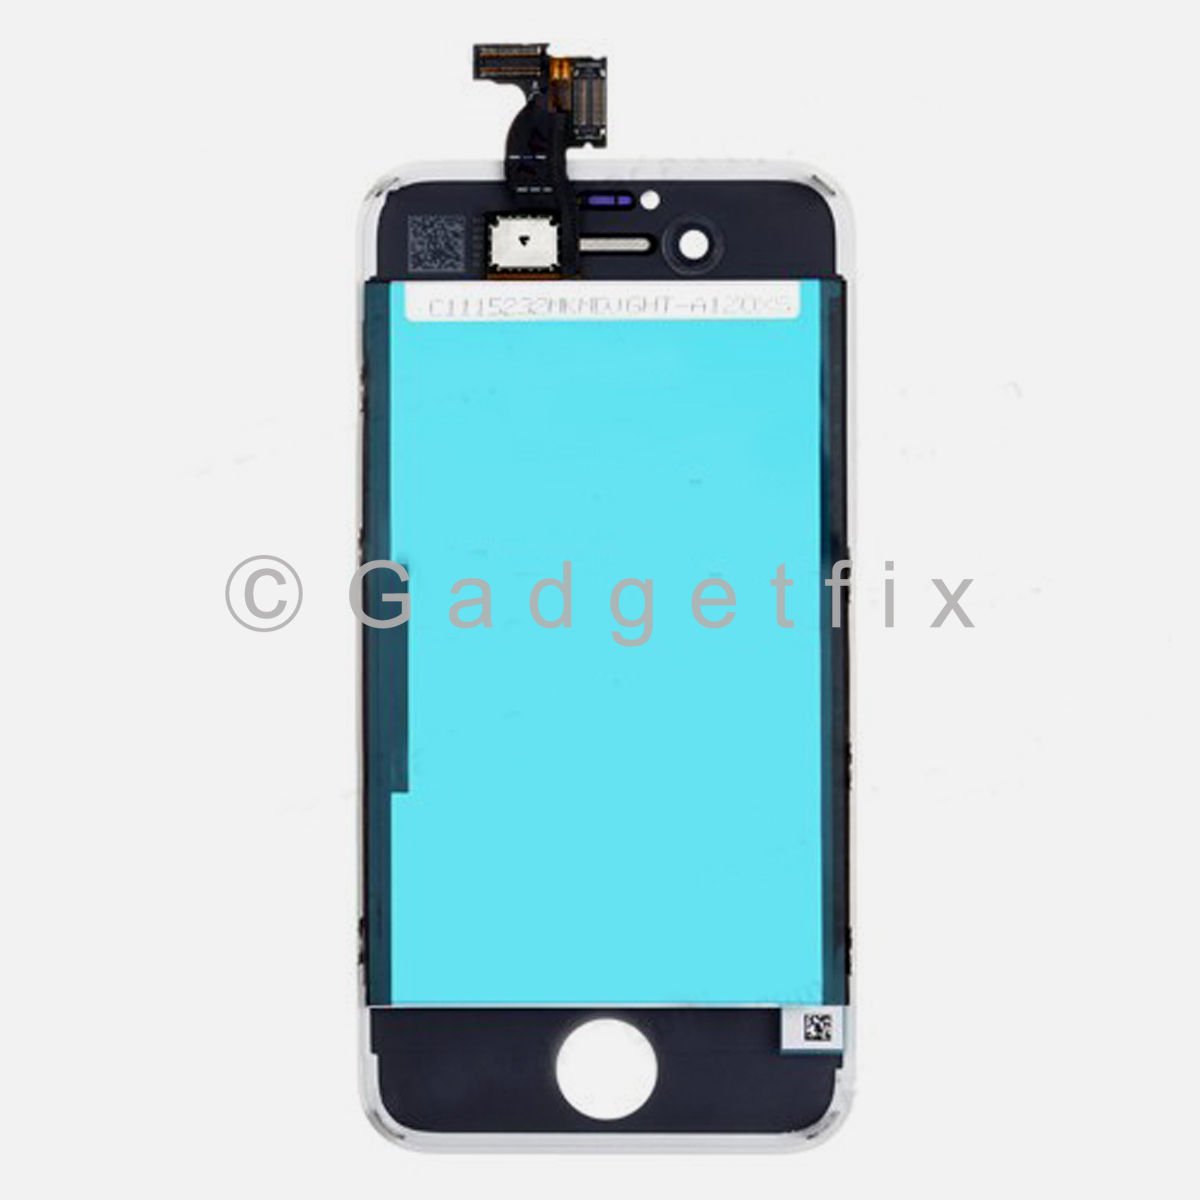 White LCD Display Touch Screen Digitizer Assembly + Frame Parts For Iphone 4S